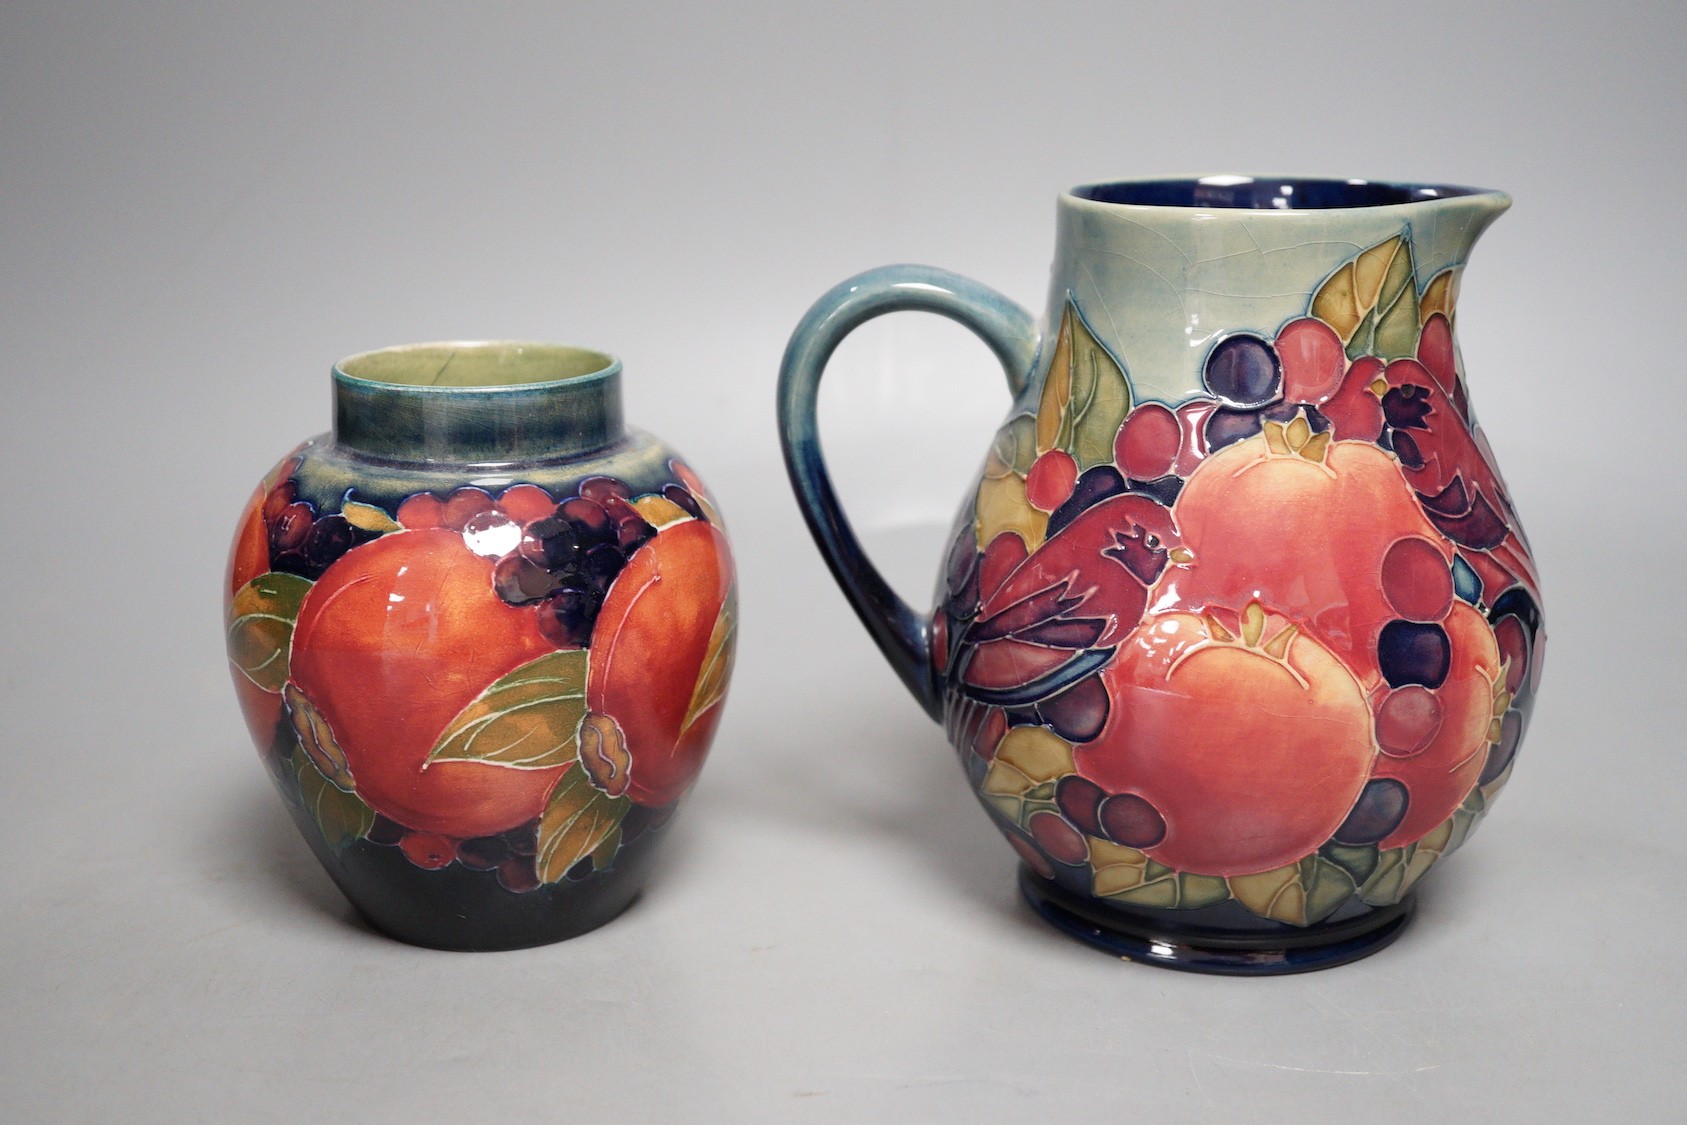 A Moorcroft finch and berry jug and a Moorcroft pomegranate jar, tallest 15cm